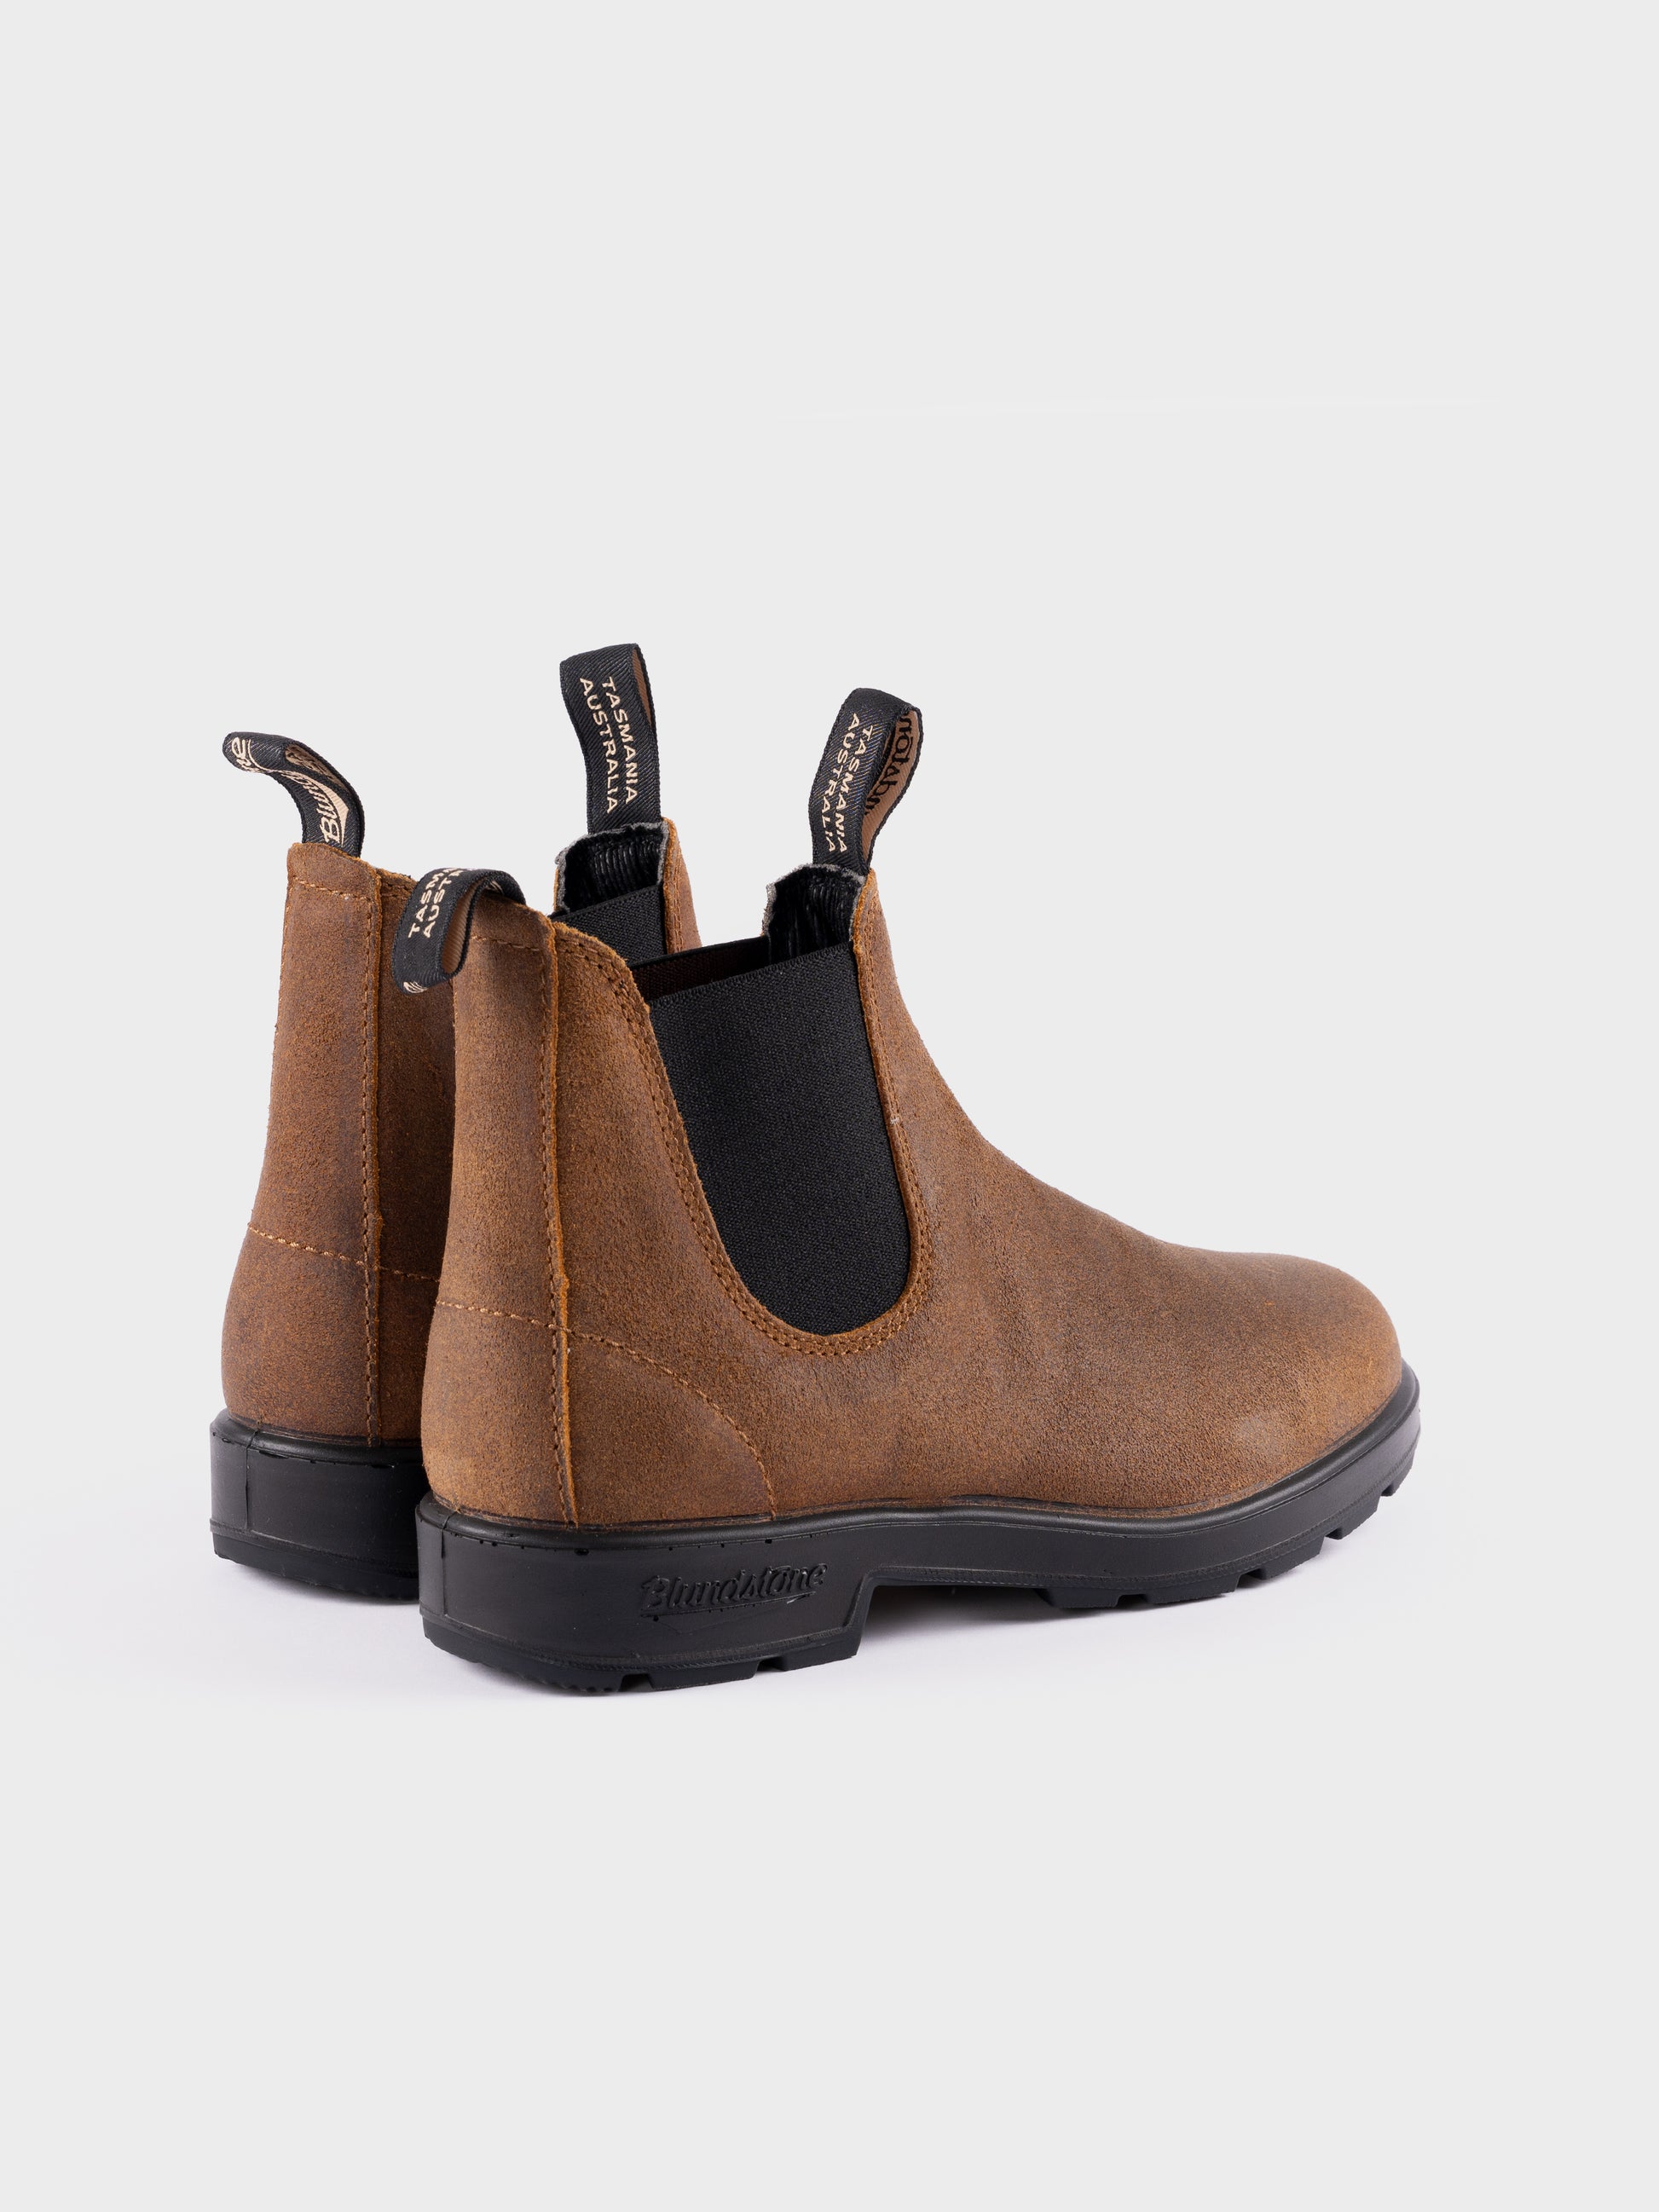 Blundstone Boots - 1911 Tobacco Leather